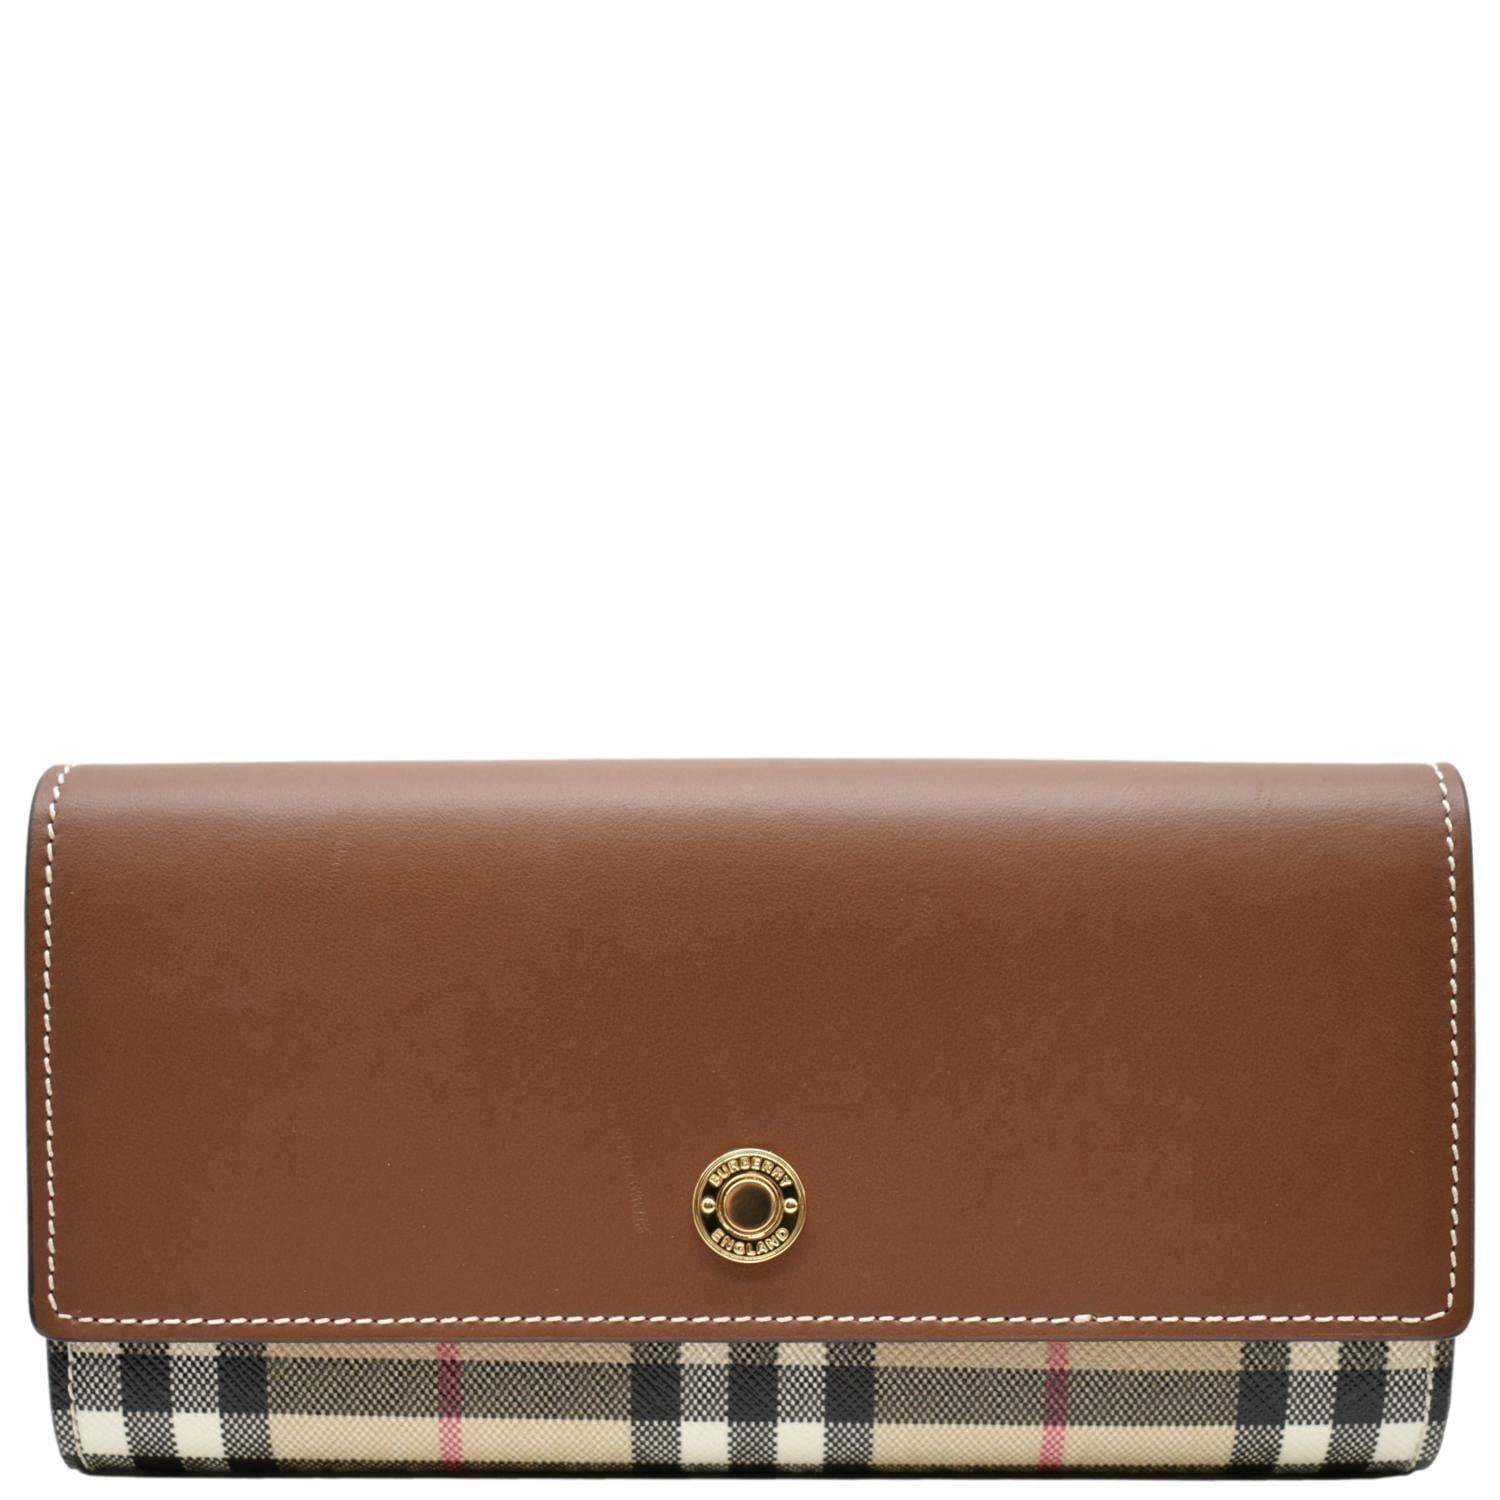 Burberry Women's Vintage House Check Classic Leather Purse Wallet with Dust Bag